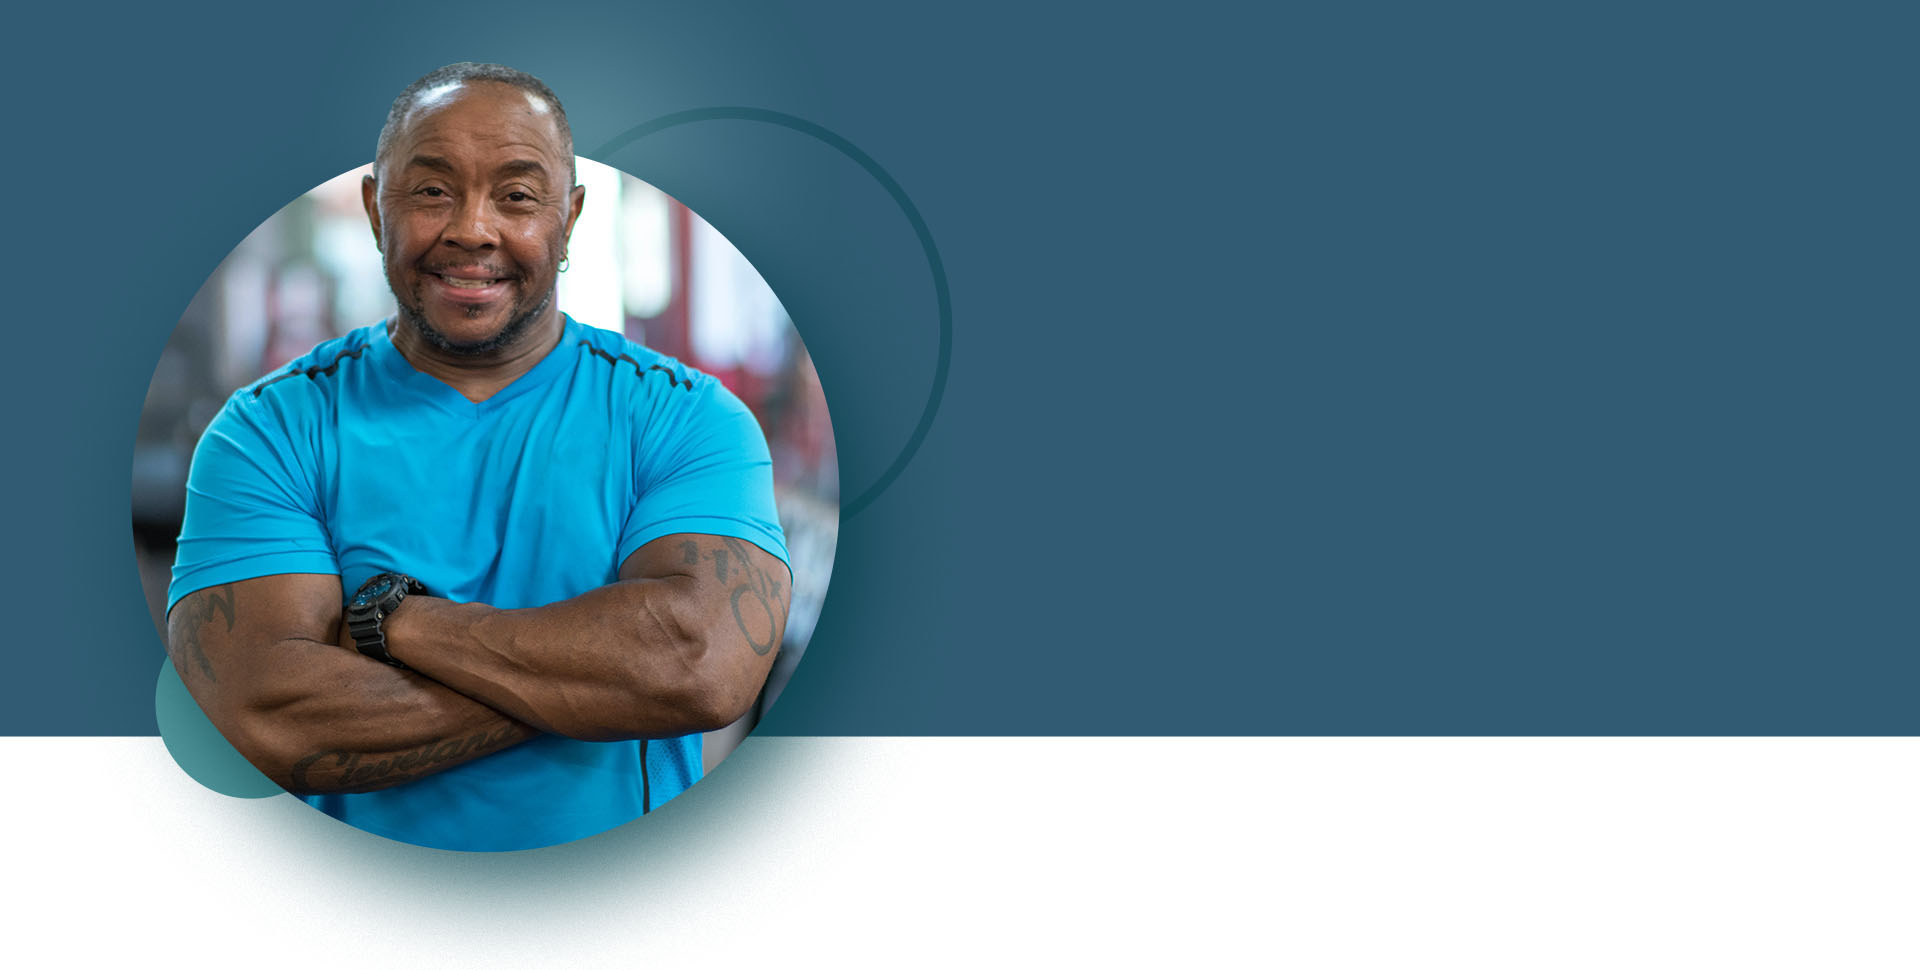 Ellis - I Choose Expert Orthopedic Care to Stay Active.